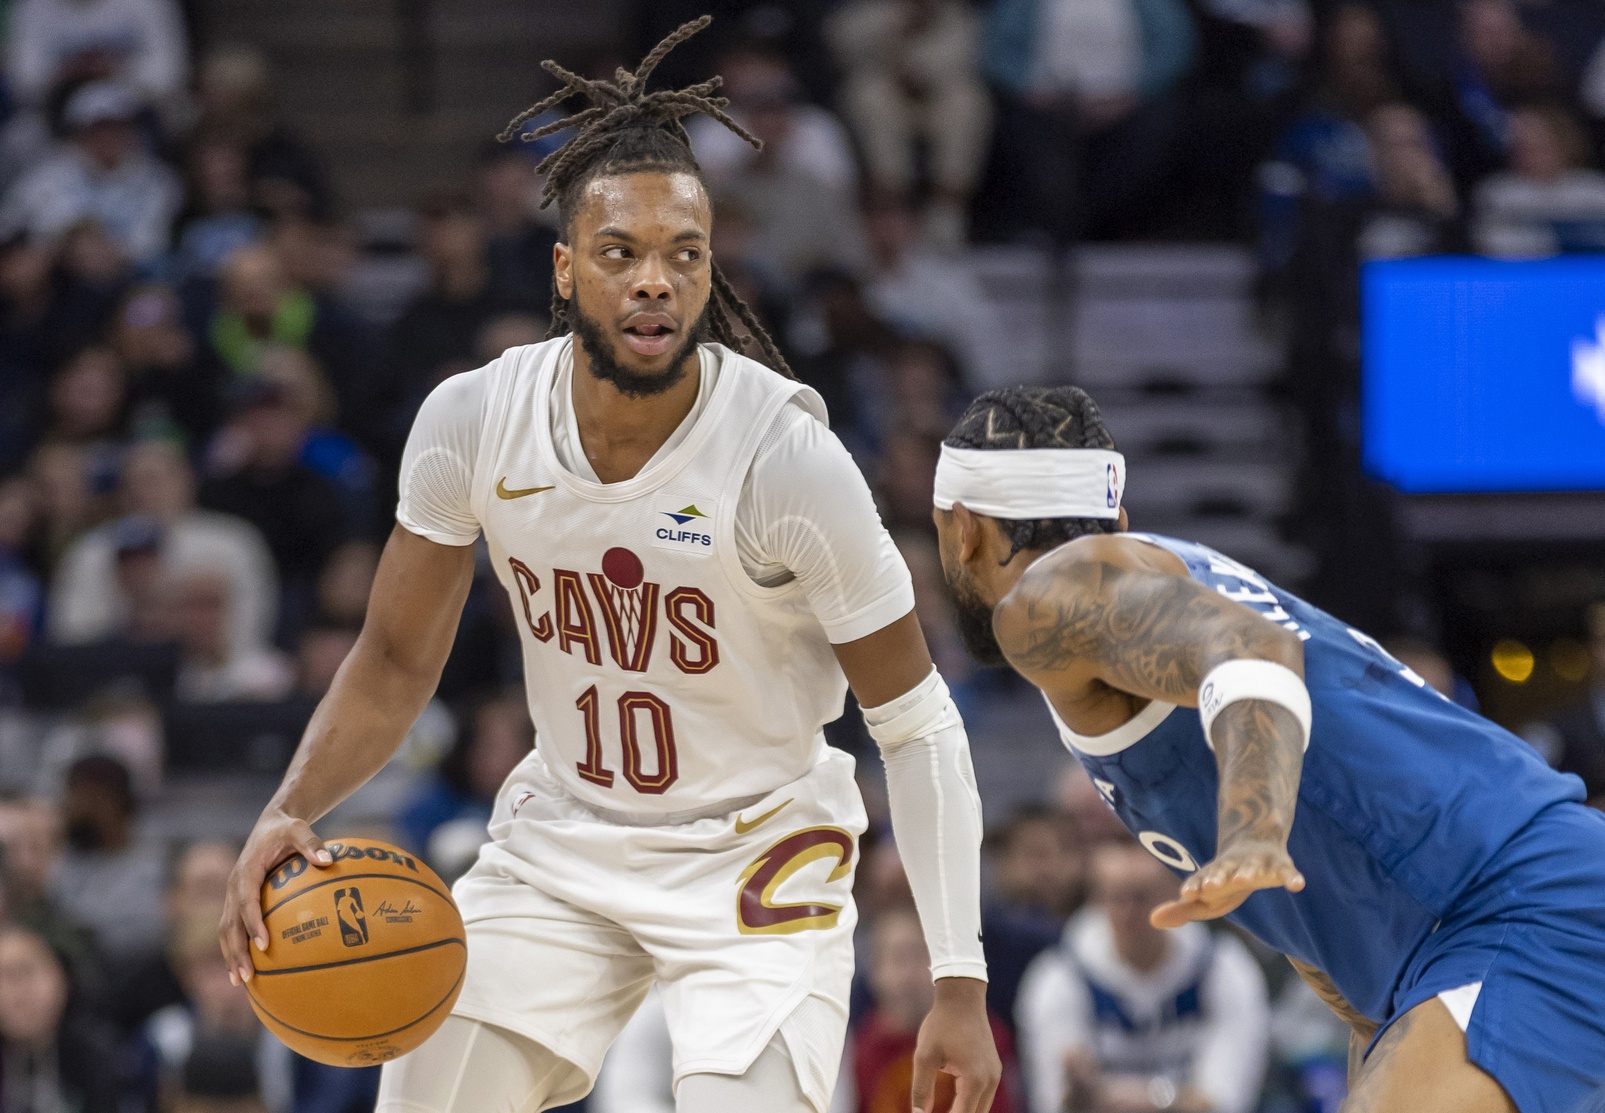 Cleveland Cavaliers guard Darius Garland (10) dribbles the ball and looks to pass over Minnesota Timberwolves guard Nickeil Alexander-Walker (9) in the first half at Target Center.